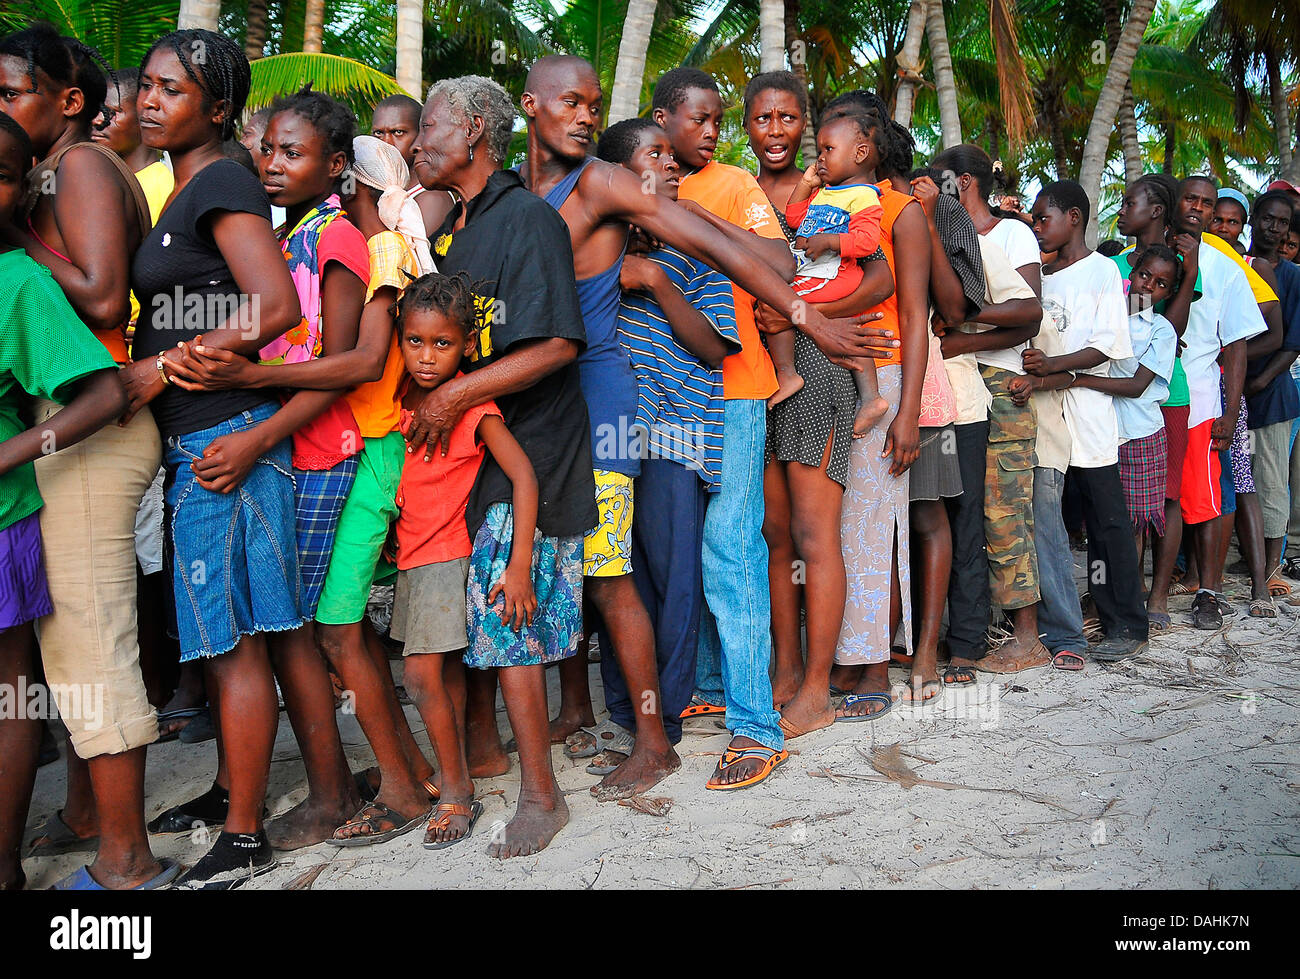 Haitians line up at a US Navy aid distribution center in the aftermath of the 7.0 magnitude earthquake that killed 220,000 people January 27, 2010 in Cerca-la-Source, Haiti. Stock Photo